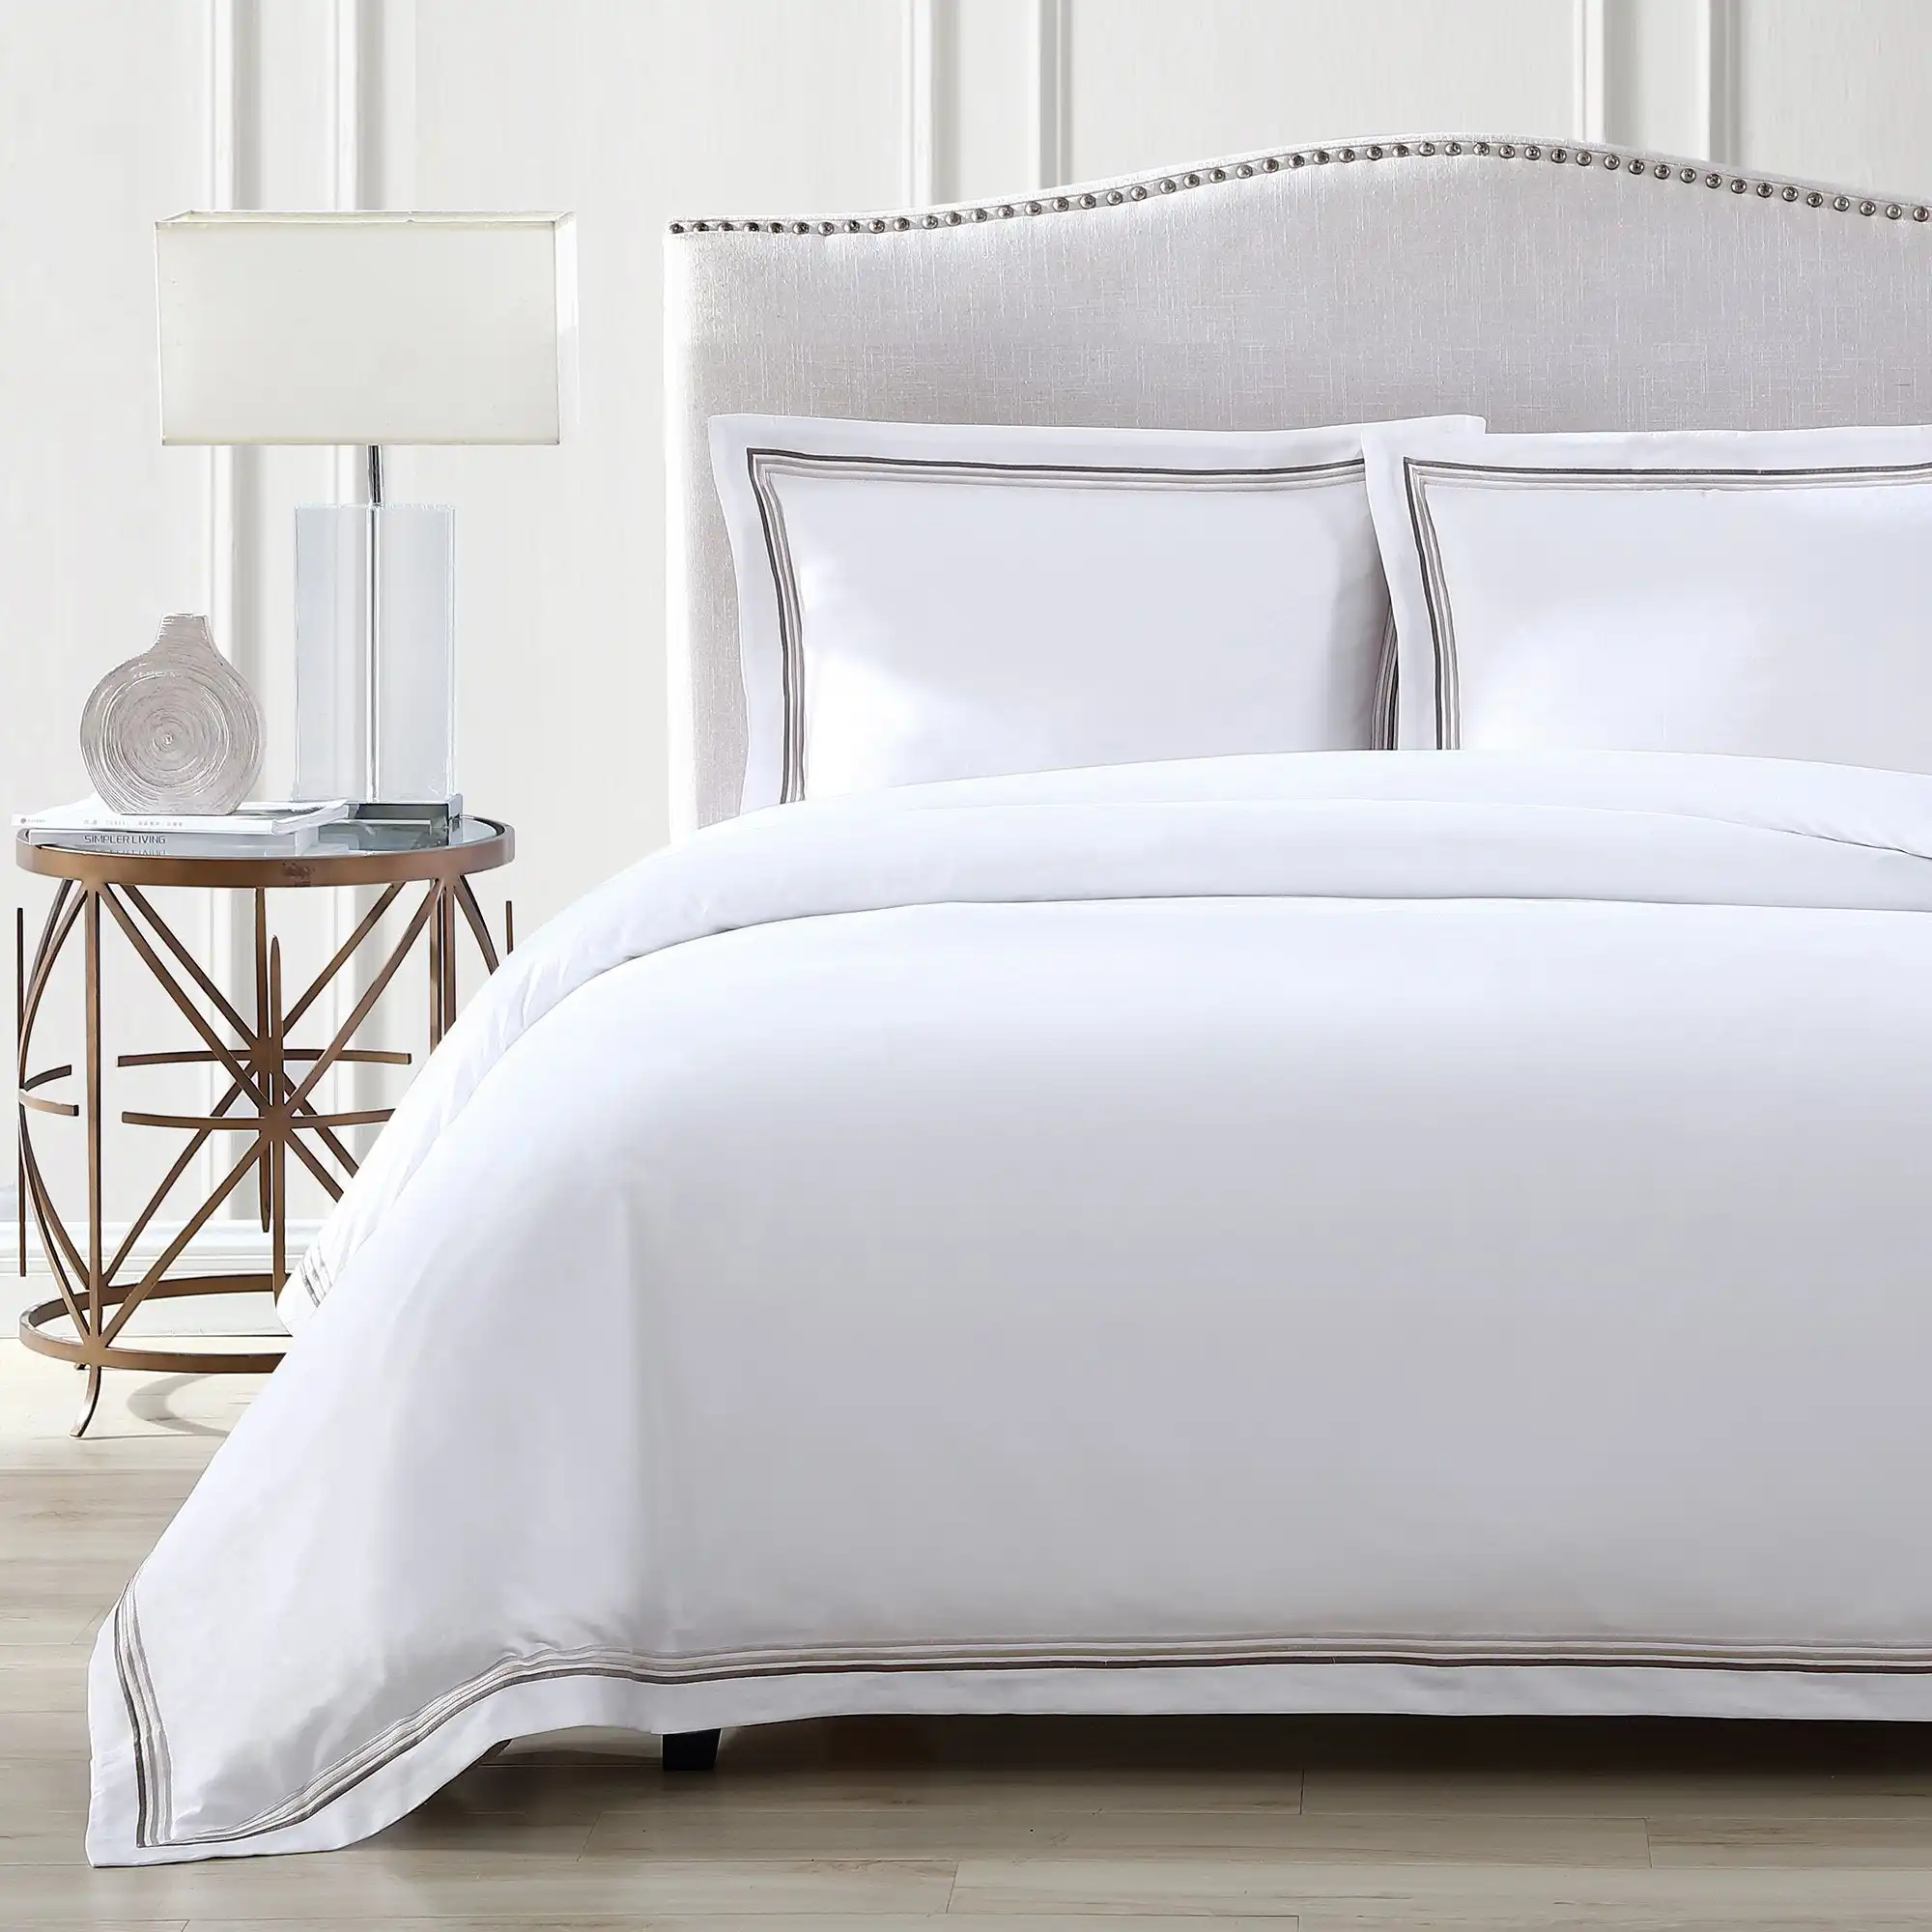 Wholesale Luxury 300T Comforter Sets Twin King Queen White Bed Sheets Percale Sateen Cotton White Hotel Duvet Cover Set